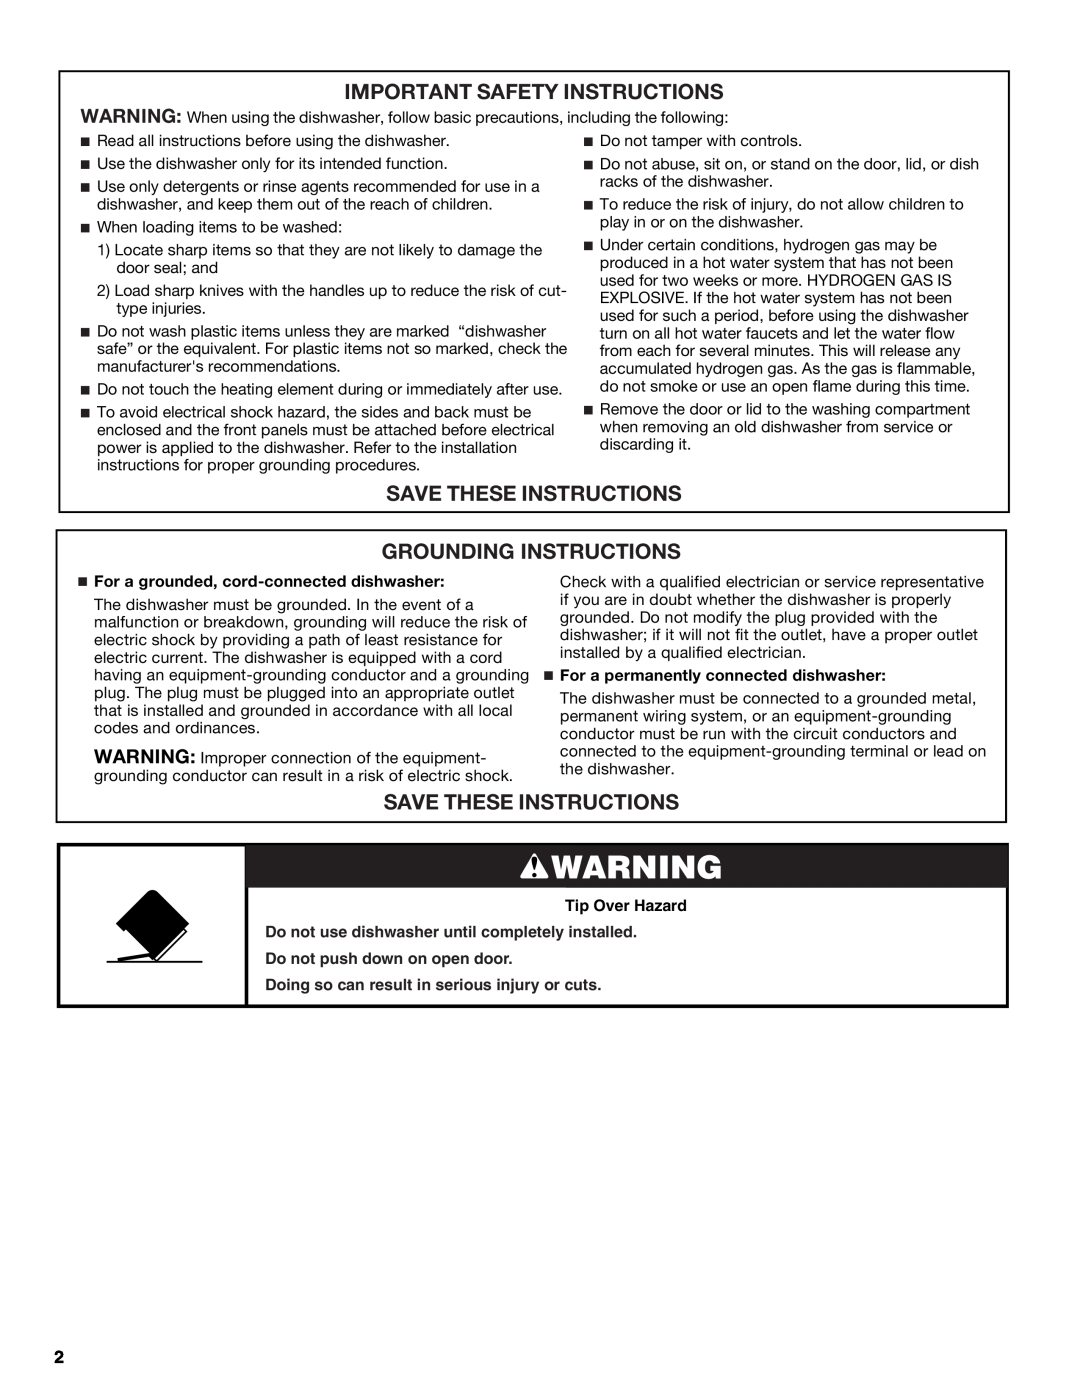 Maytag MDC4809AWW, W10240116A, W10240117A Important Safety Instructions, Save These Instructions Grounding Instructions 